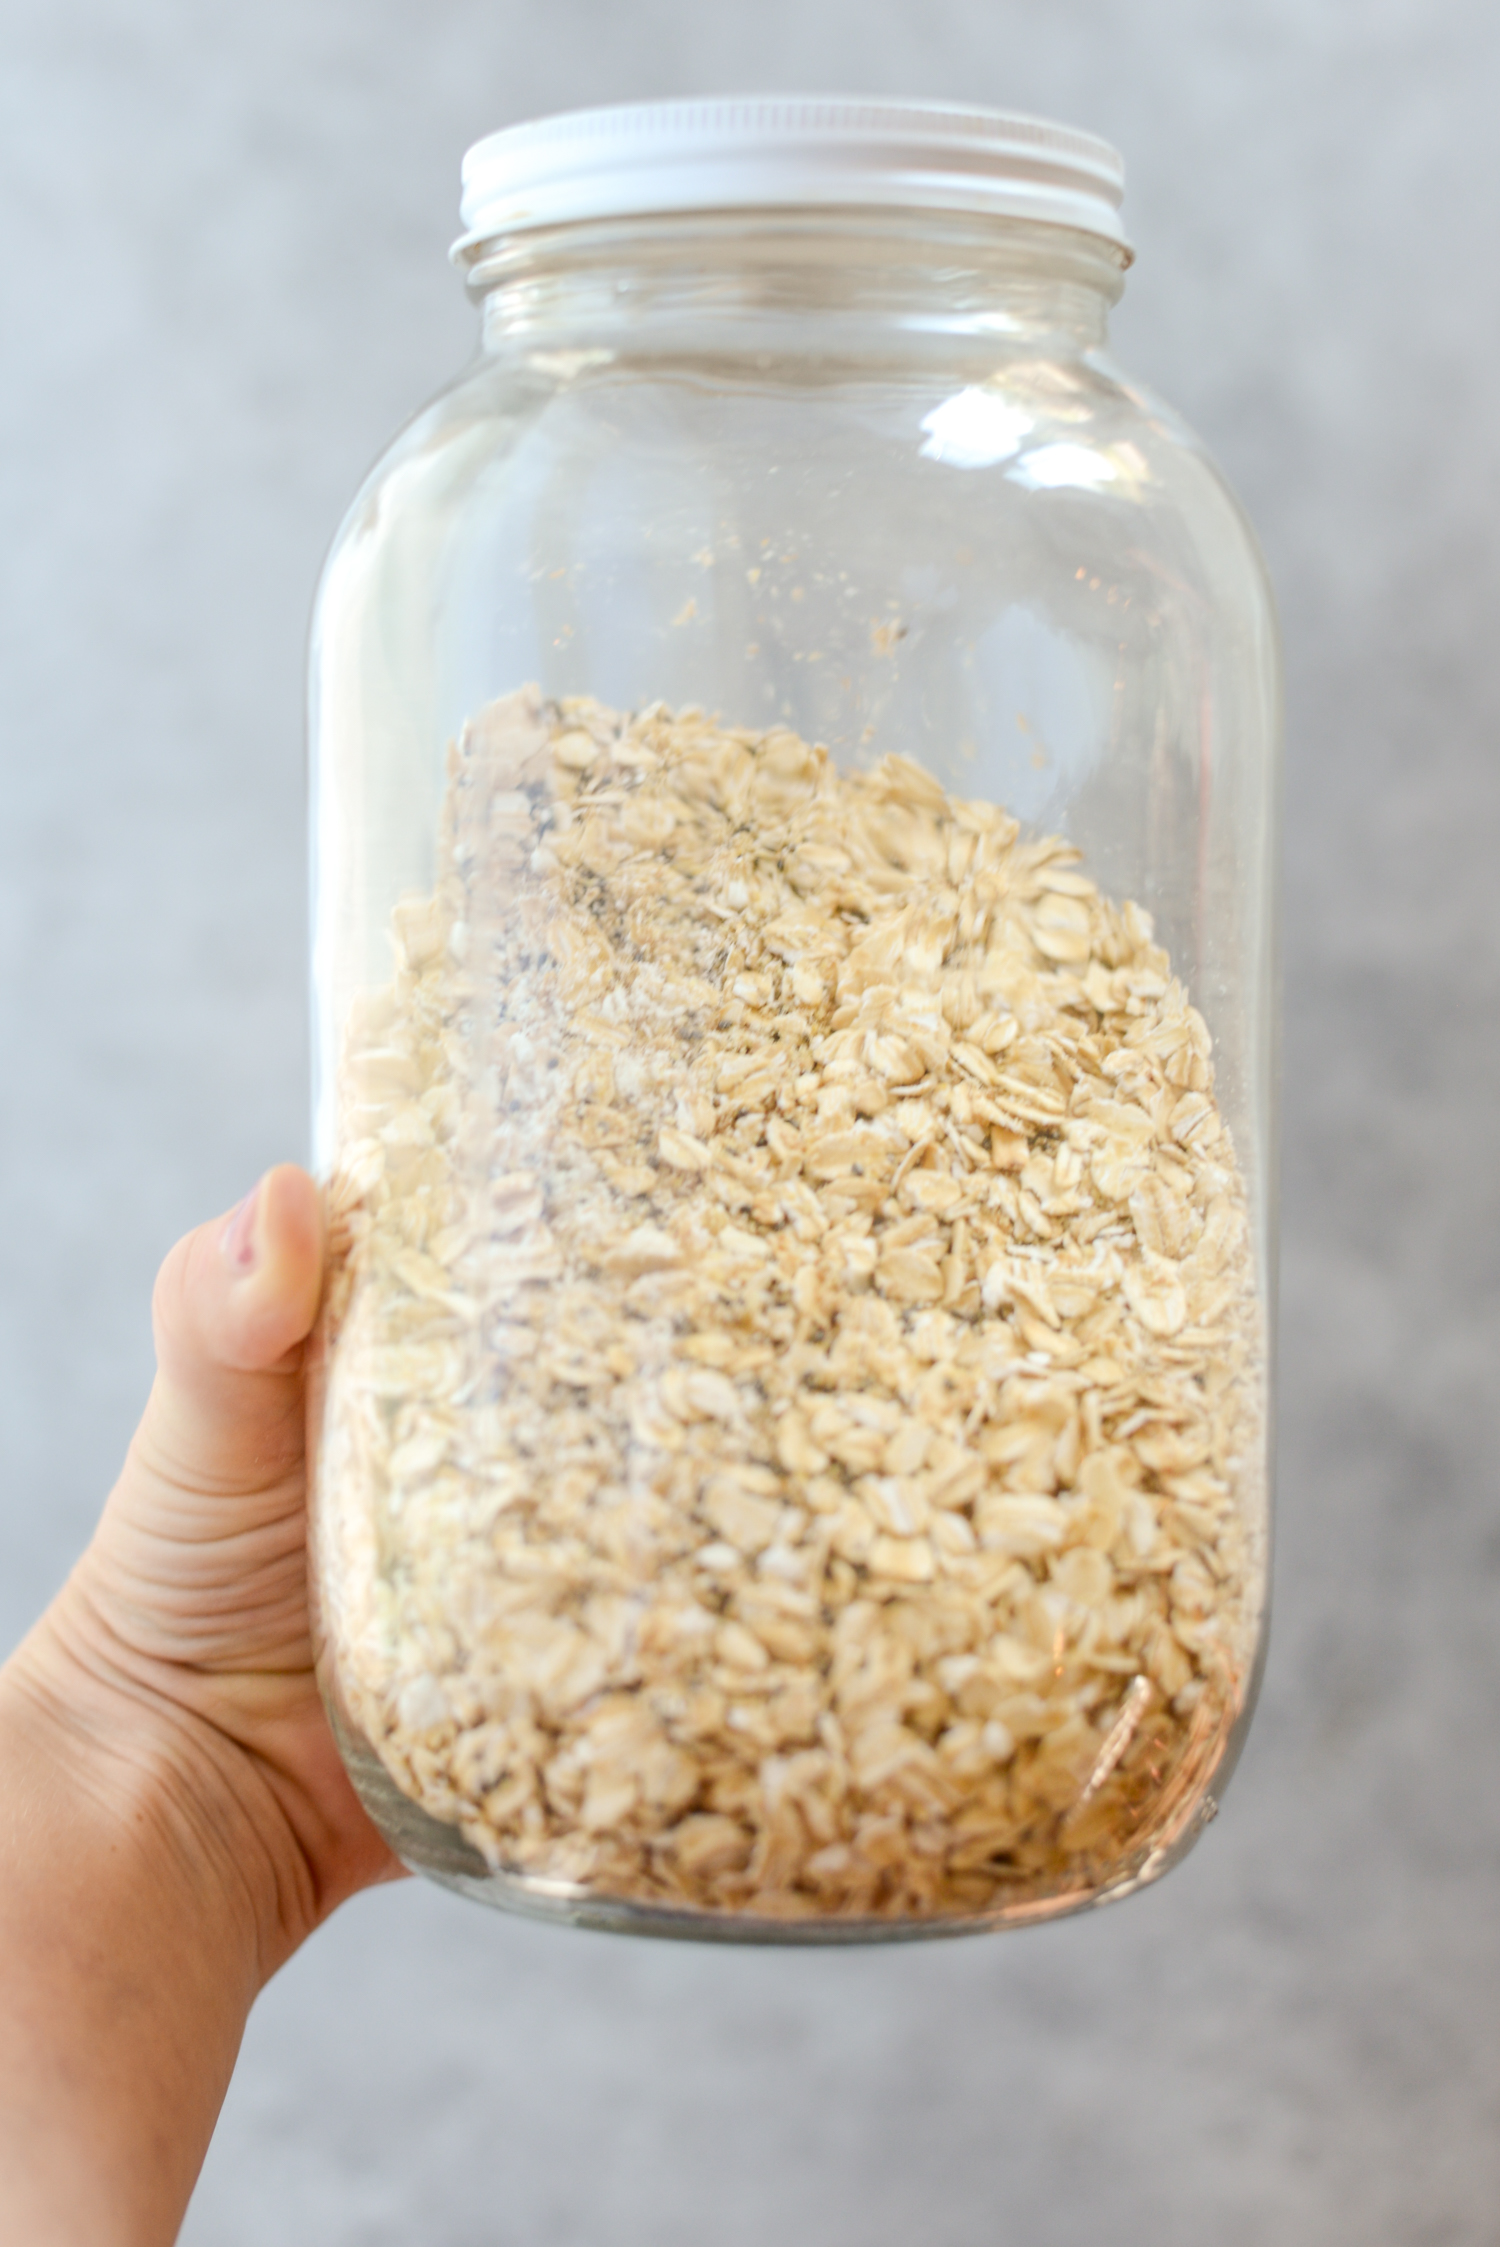 Healthy Protein Packed Instant Oatmeal Recipe 5-Ways | simplerootswellness.com #oatmeal #protein #quick #breakfast #healthy